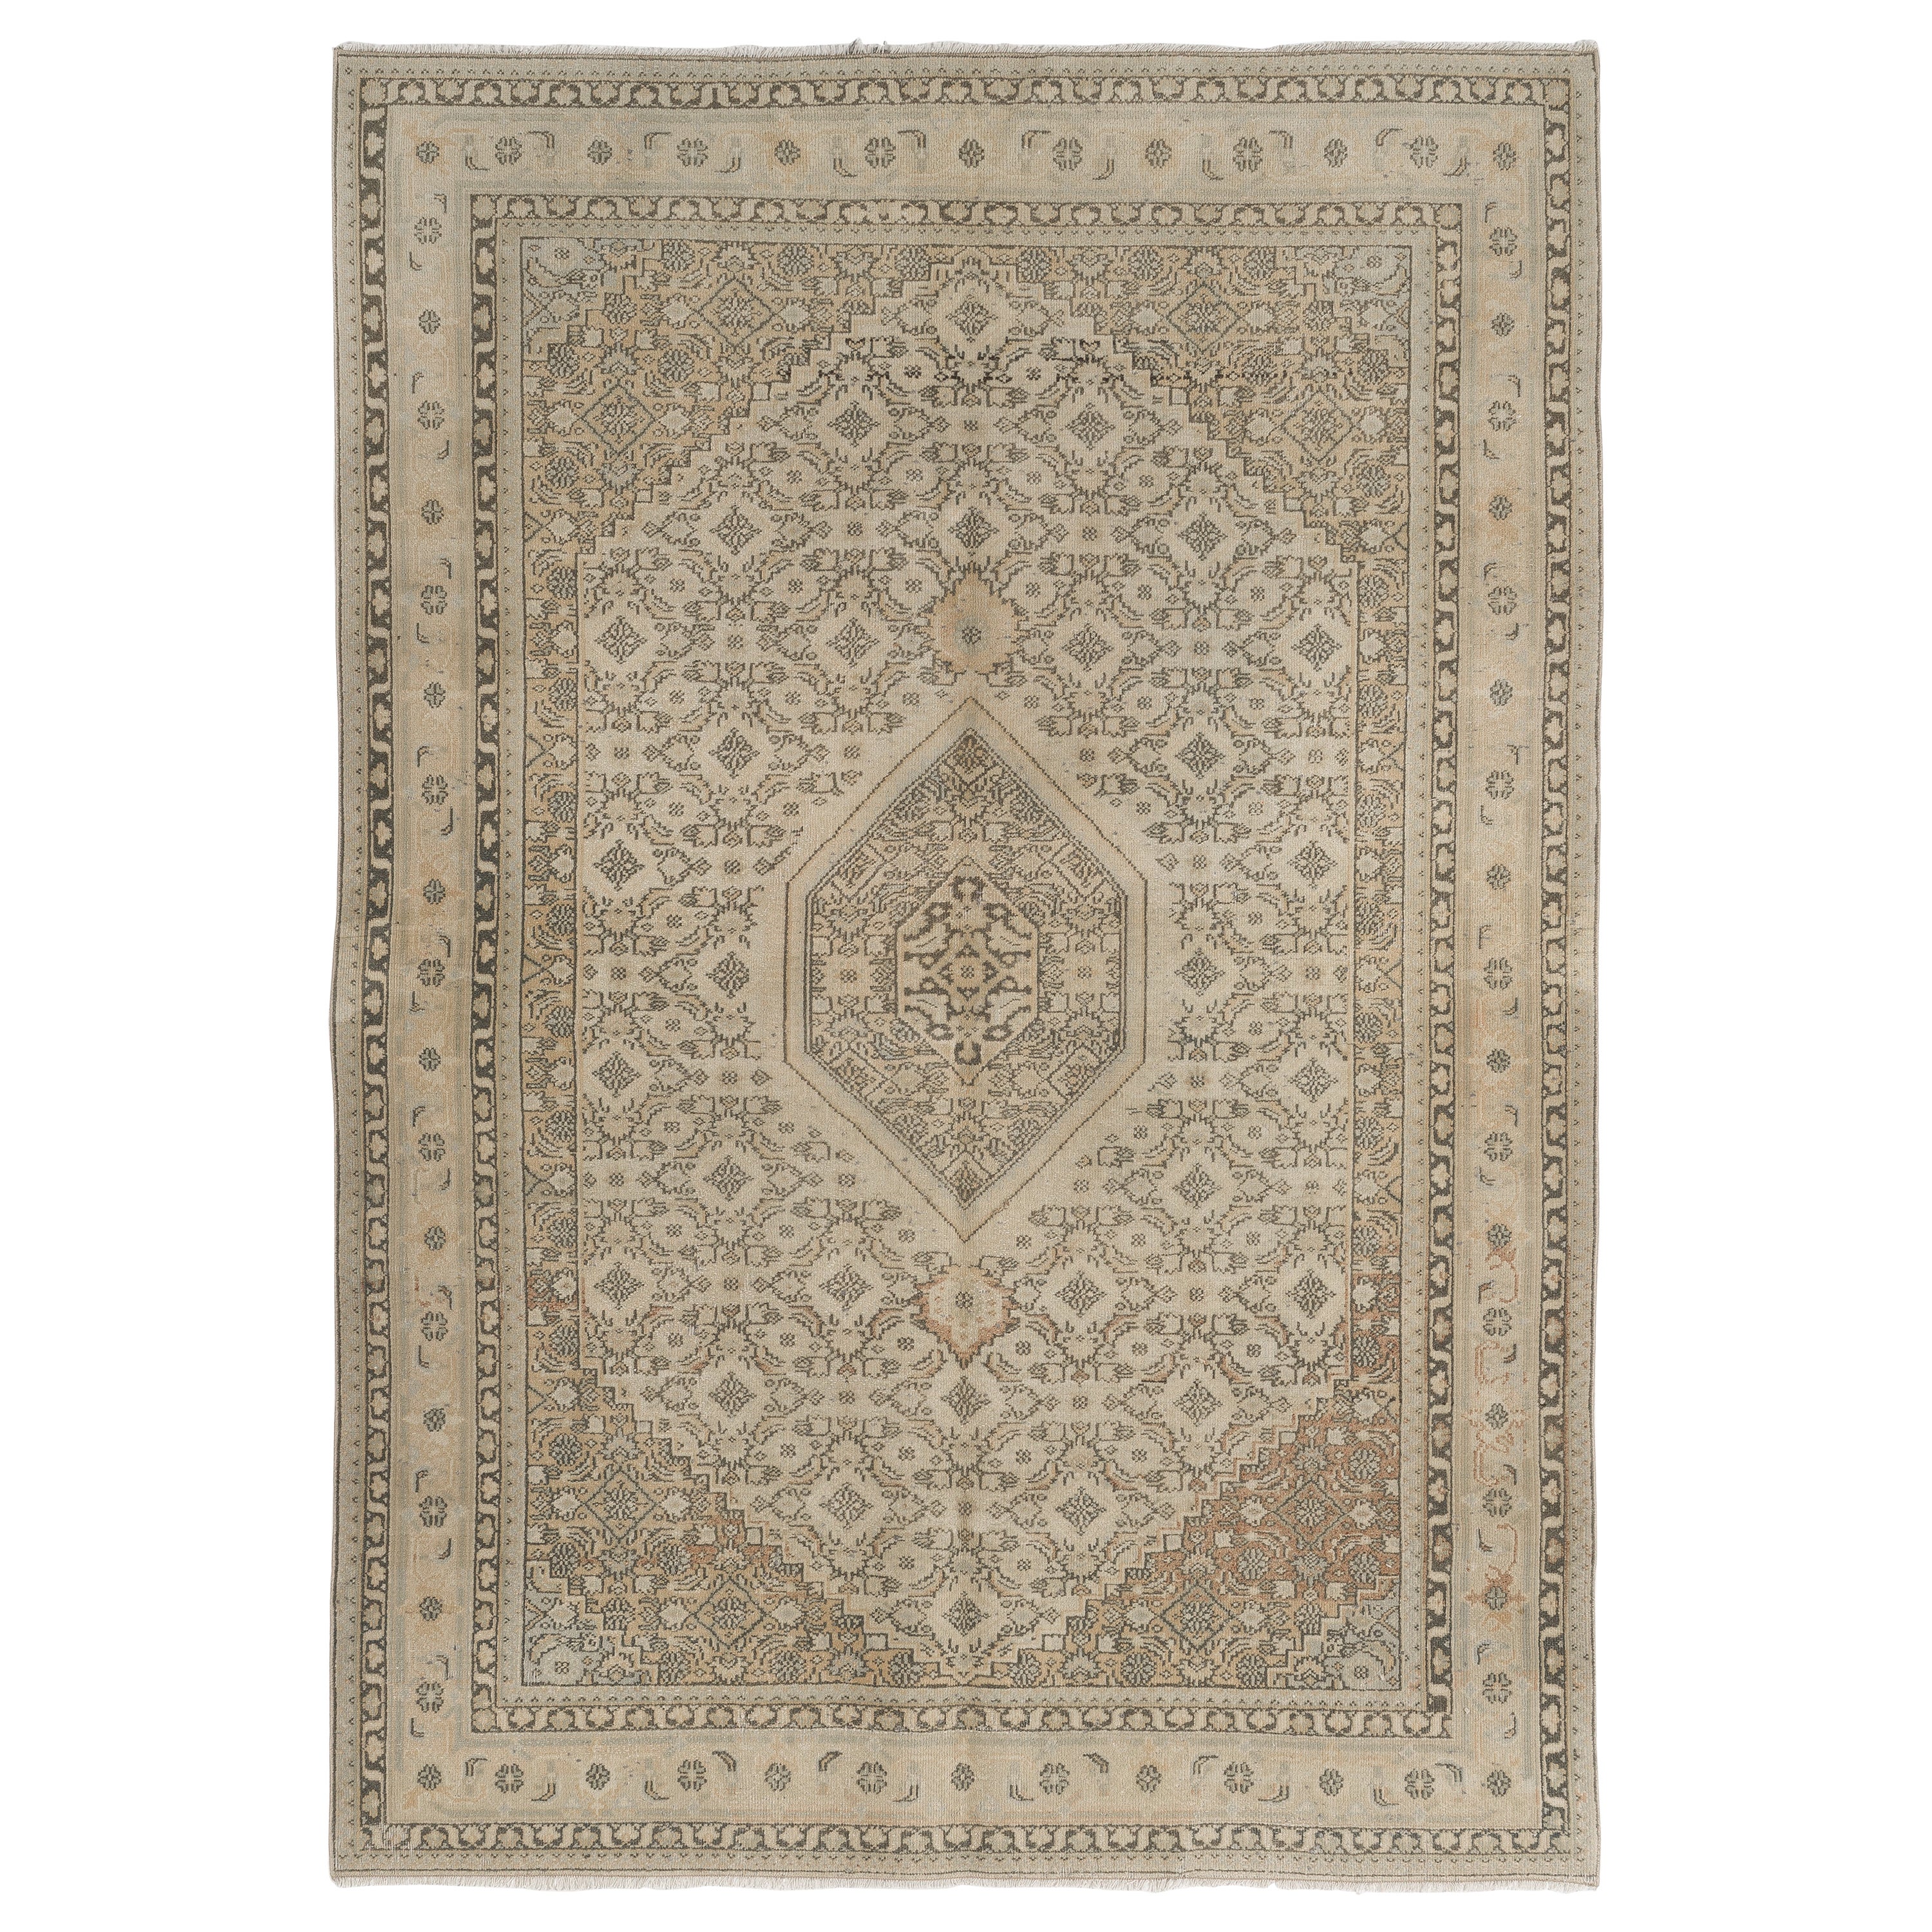 5.4x7.7 ft Hand Made Vintage Anatolian Oushak Wool Area Rug in Neutral Colors